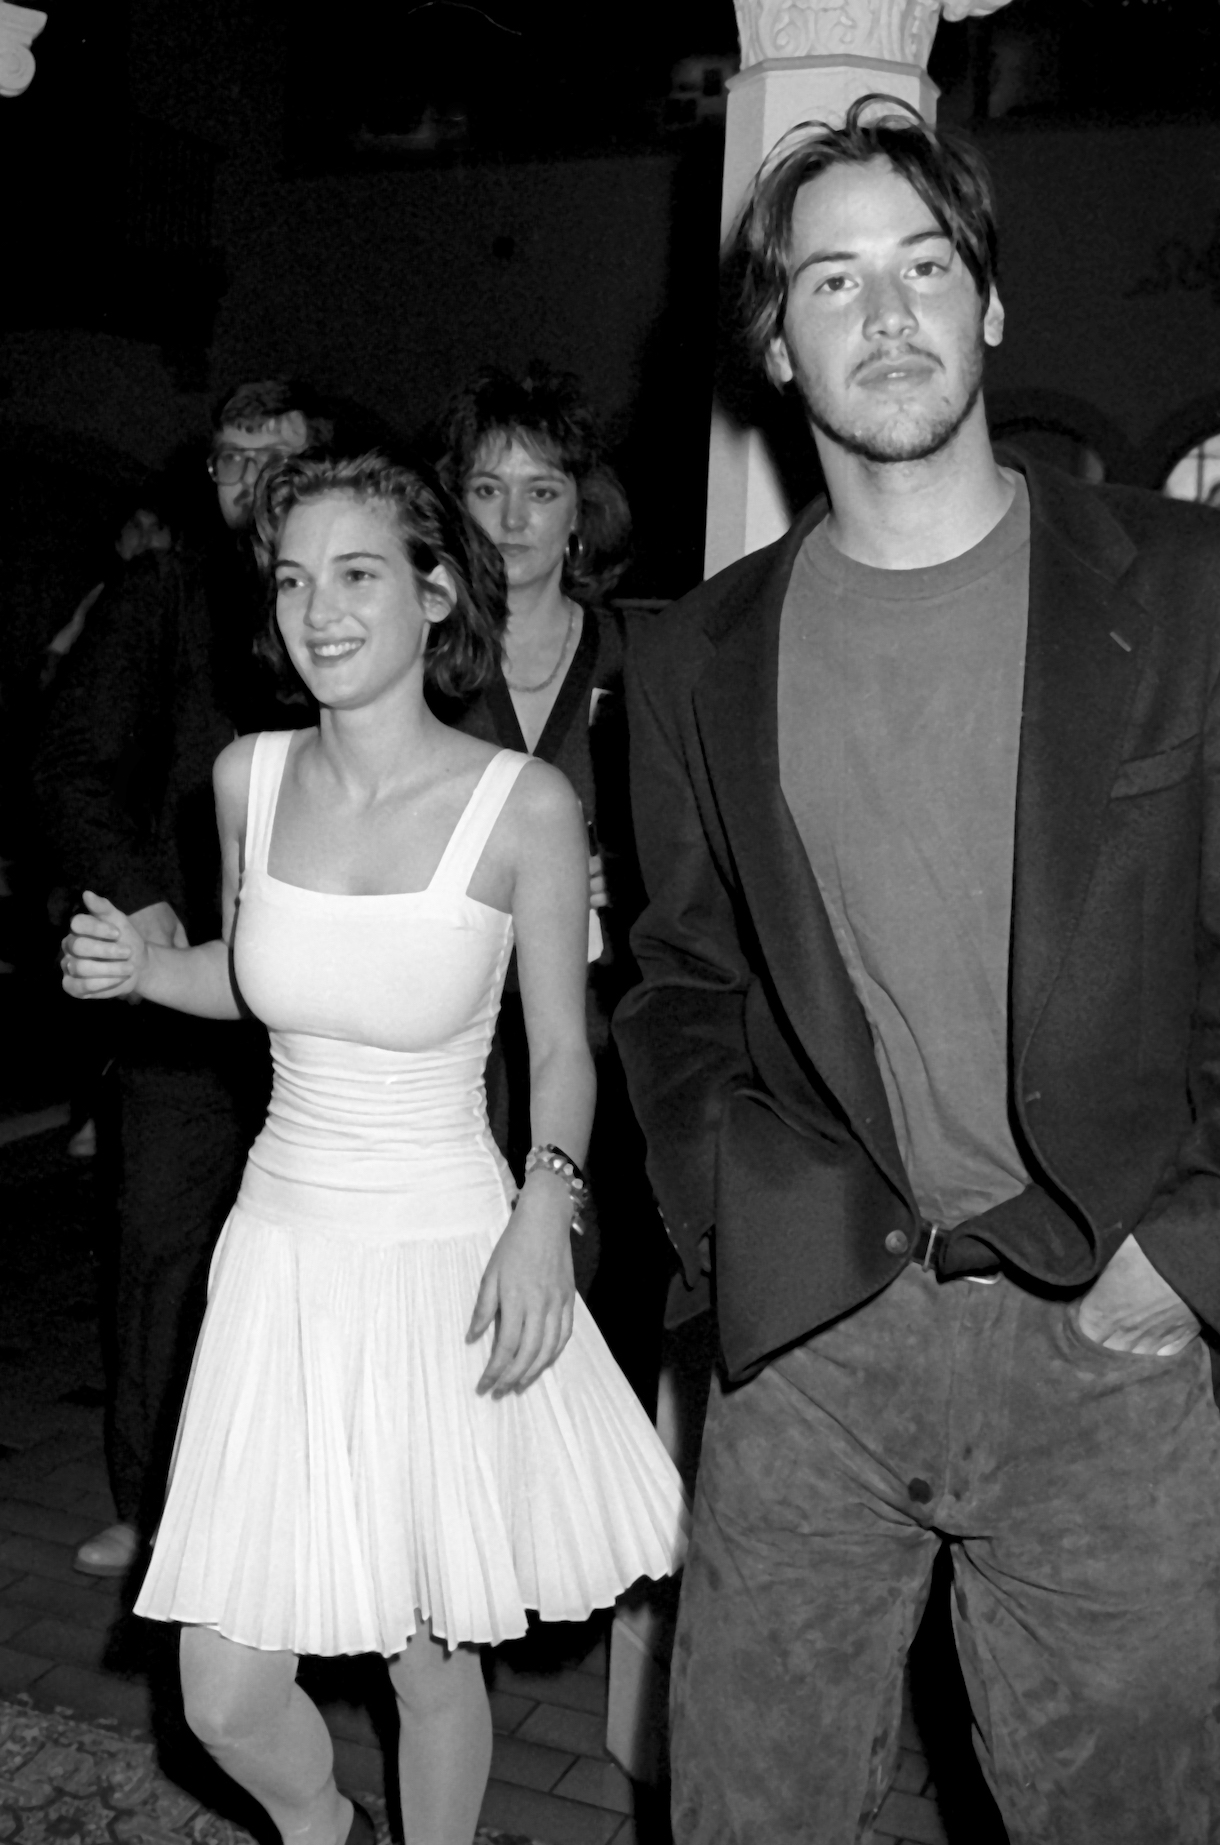 Winona Ryder and Keanu Reeves attend Fourth Annual Independent Spirit Awards in 1989